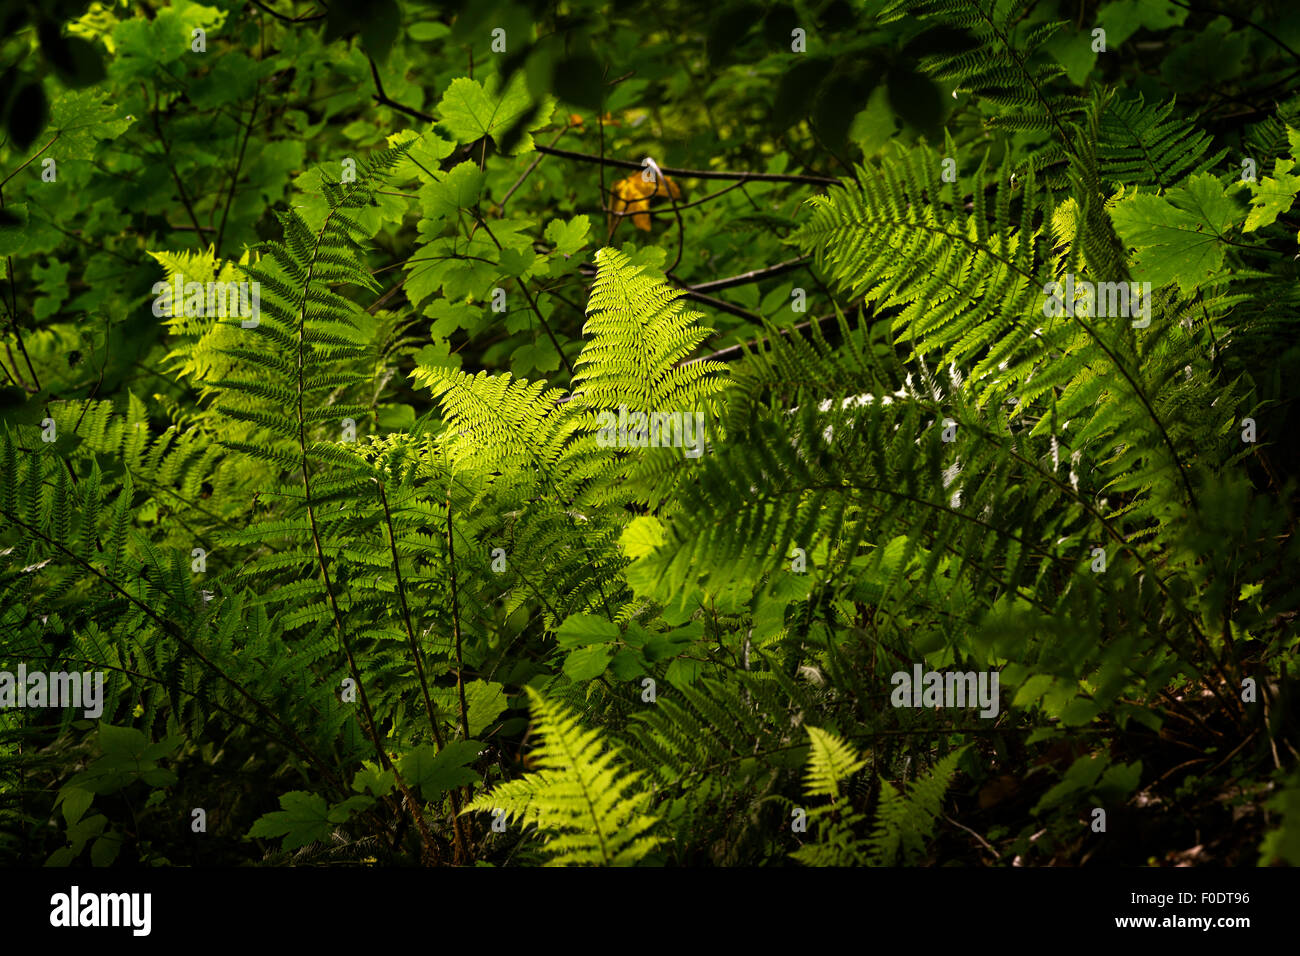 The bracken in the forest Stock Photo